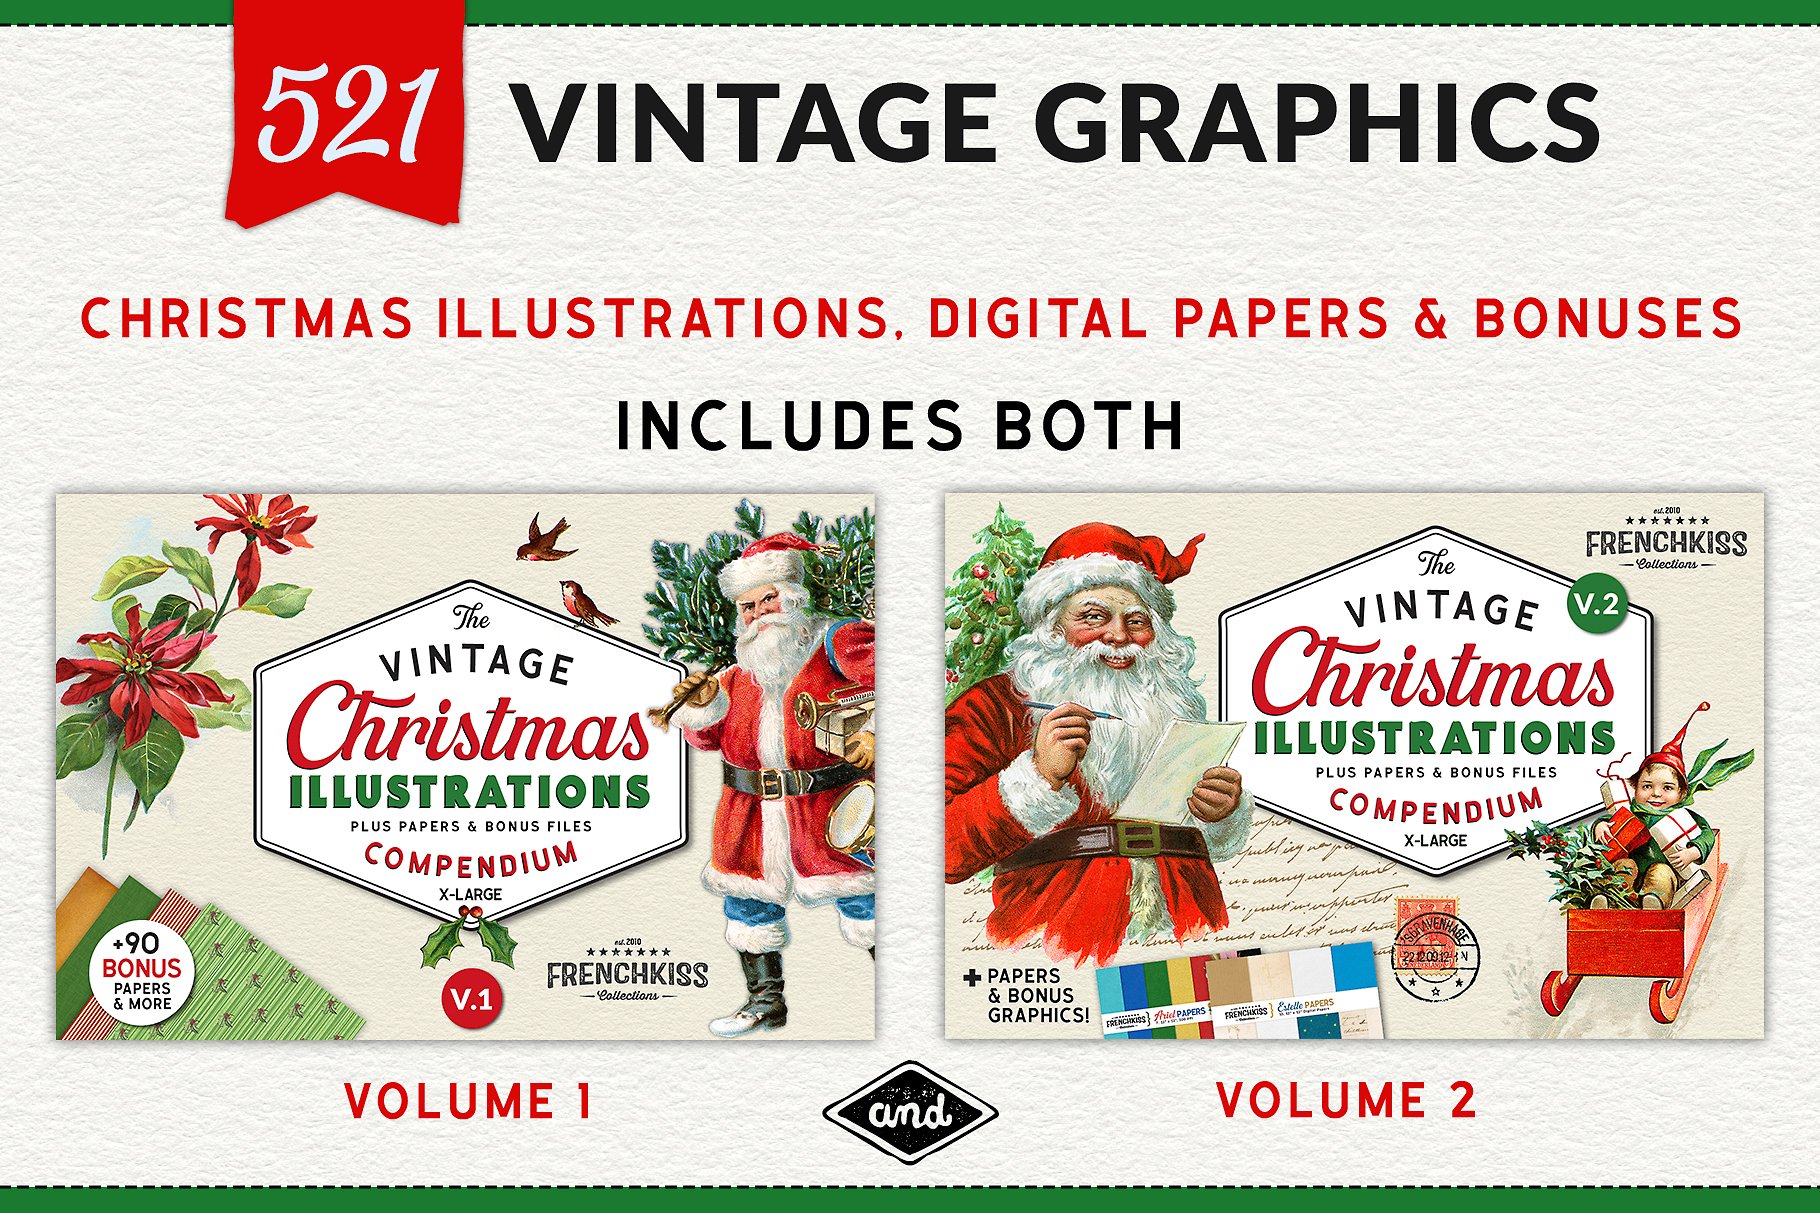 Retro Christmas Bells Wrapping Paper Wallpaper Download -  UK  Vintage  christmas wrapping paper, Vintage christmas images, Vintage christmas